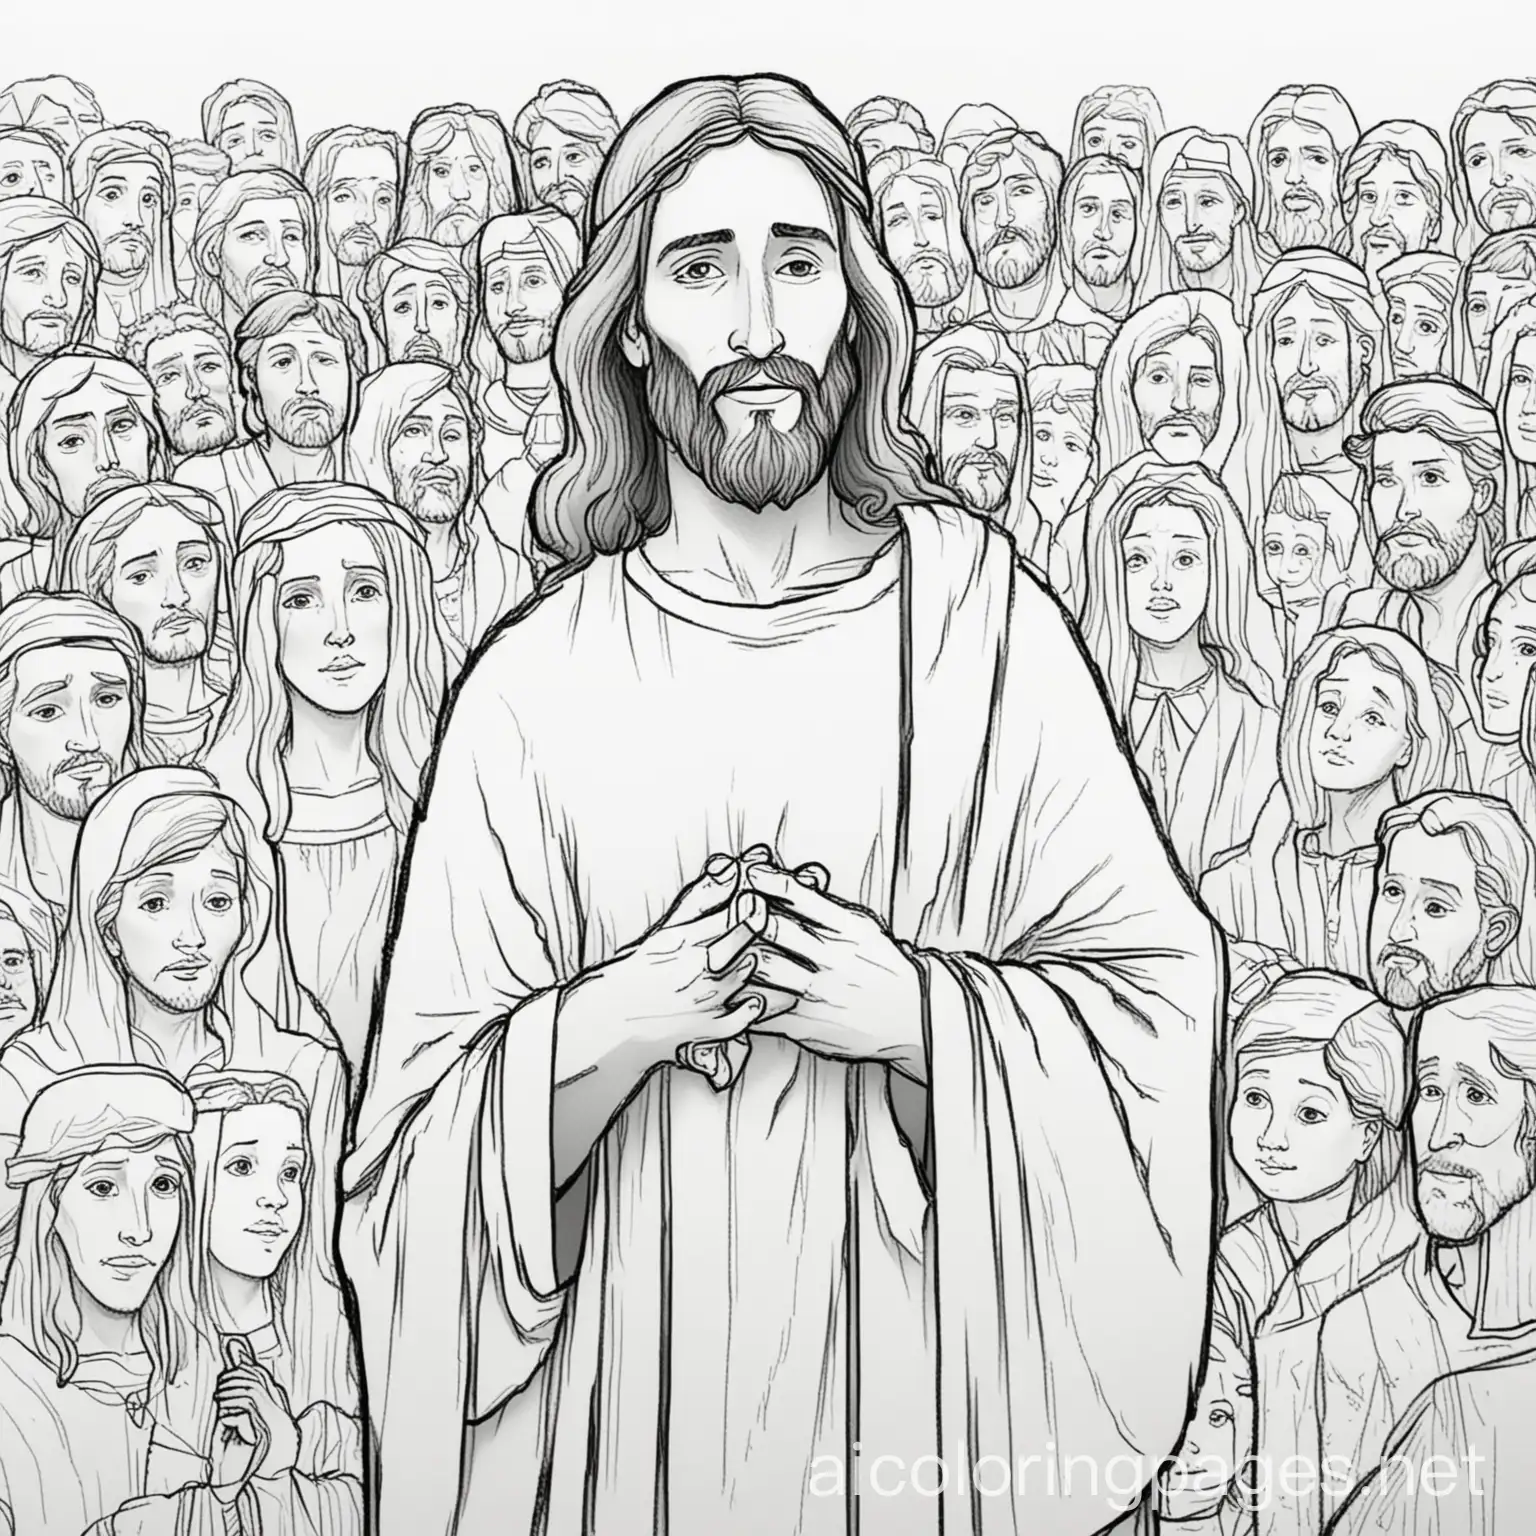 Jesus-Christ-Coloring-Page-for-Kids-Simple-Line-Art-on-White-Background